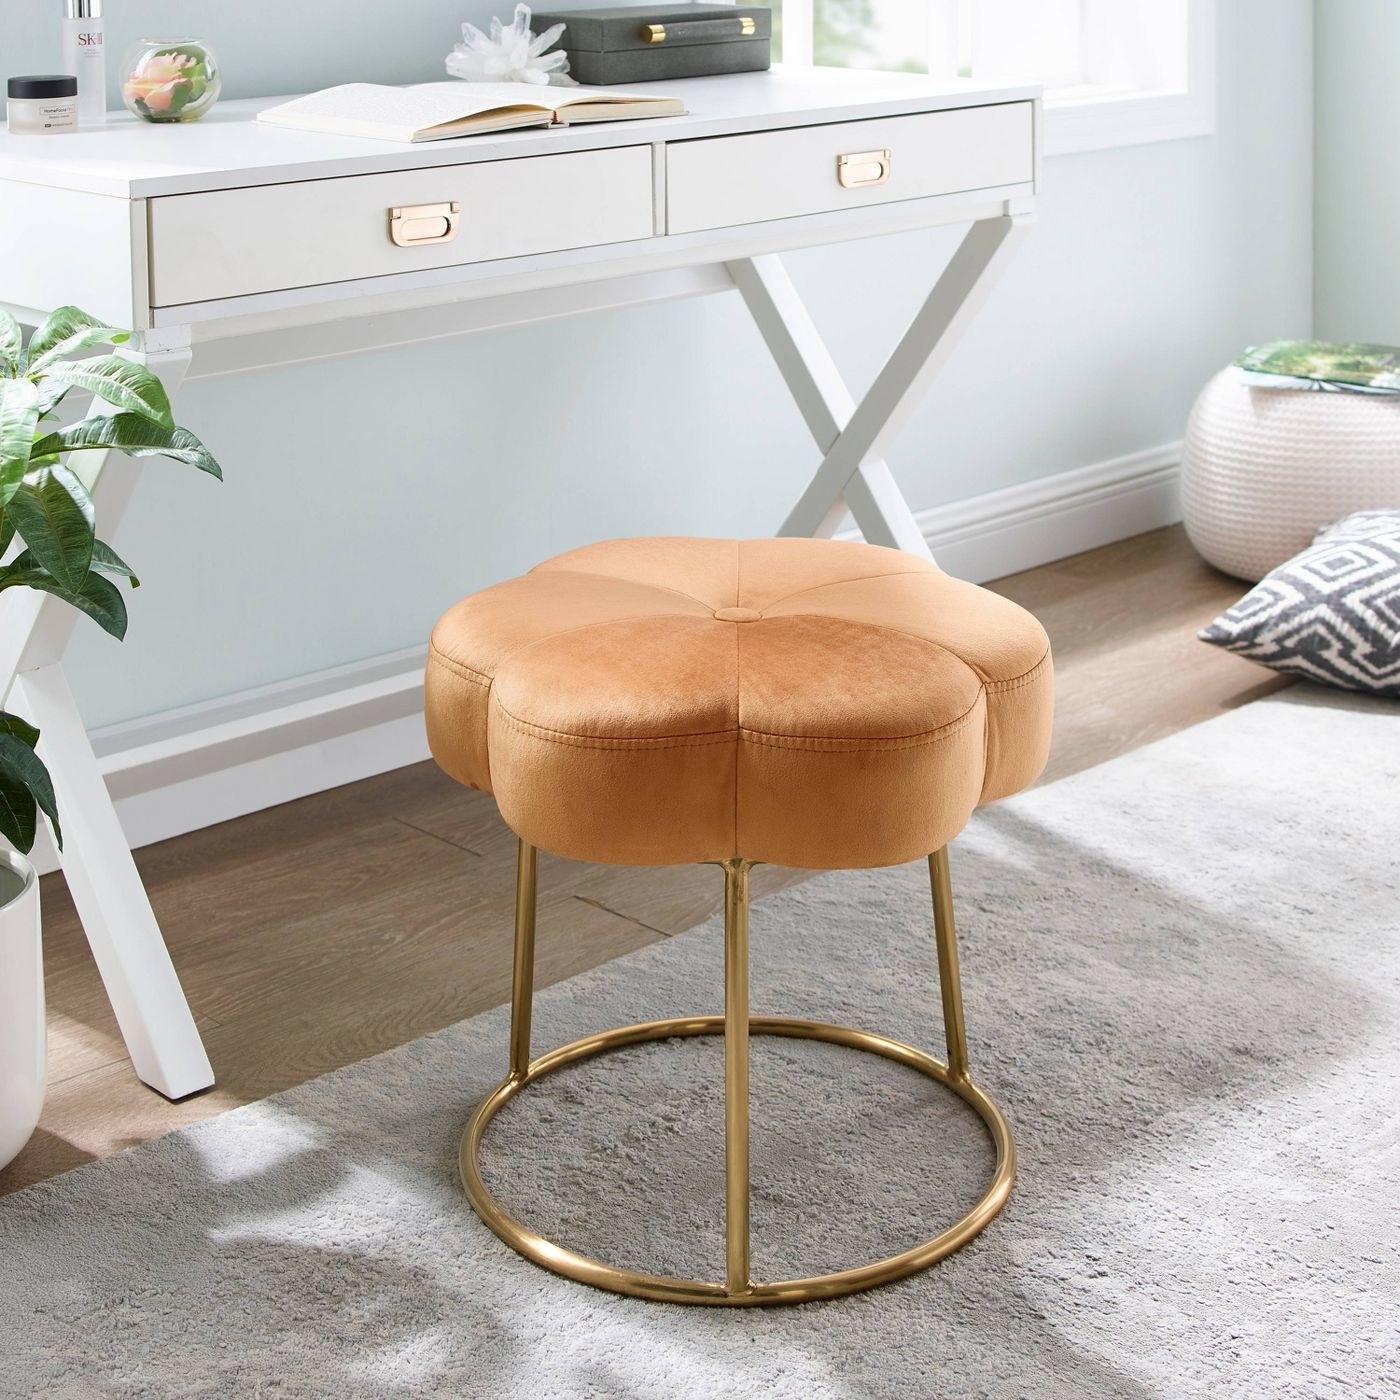 Orange stool in a home office